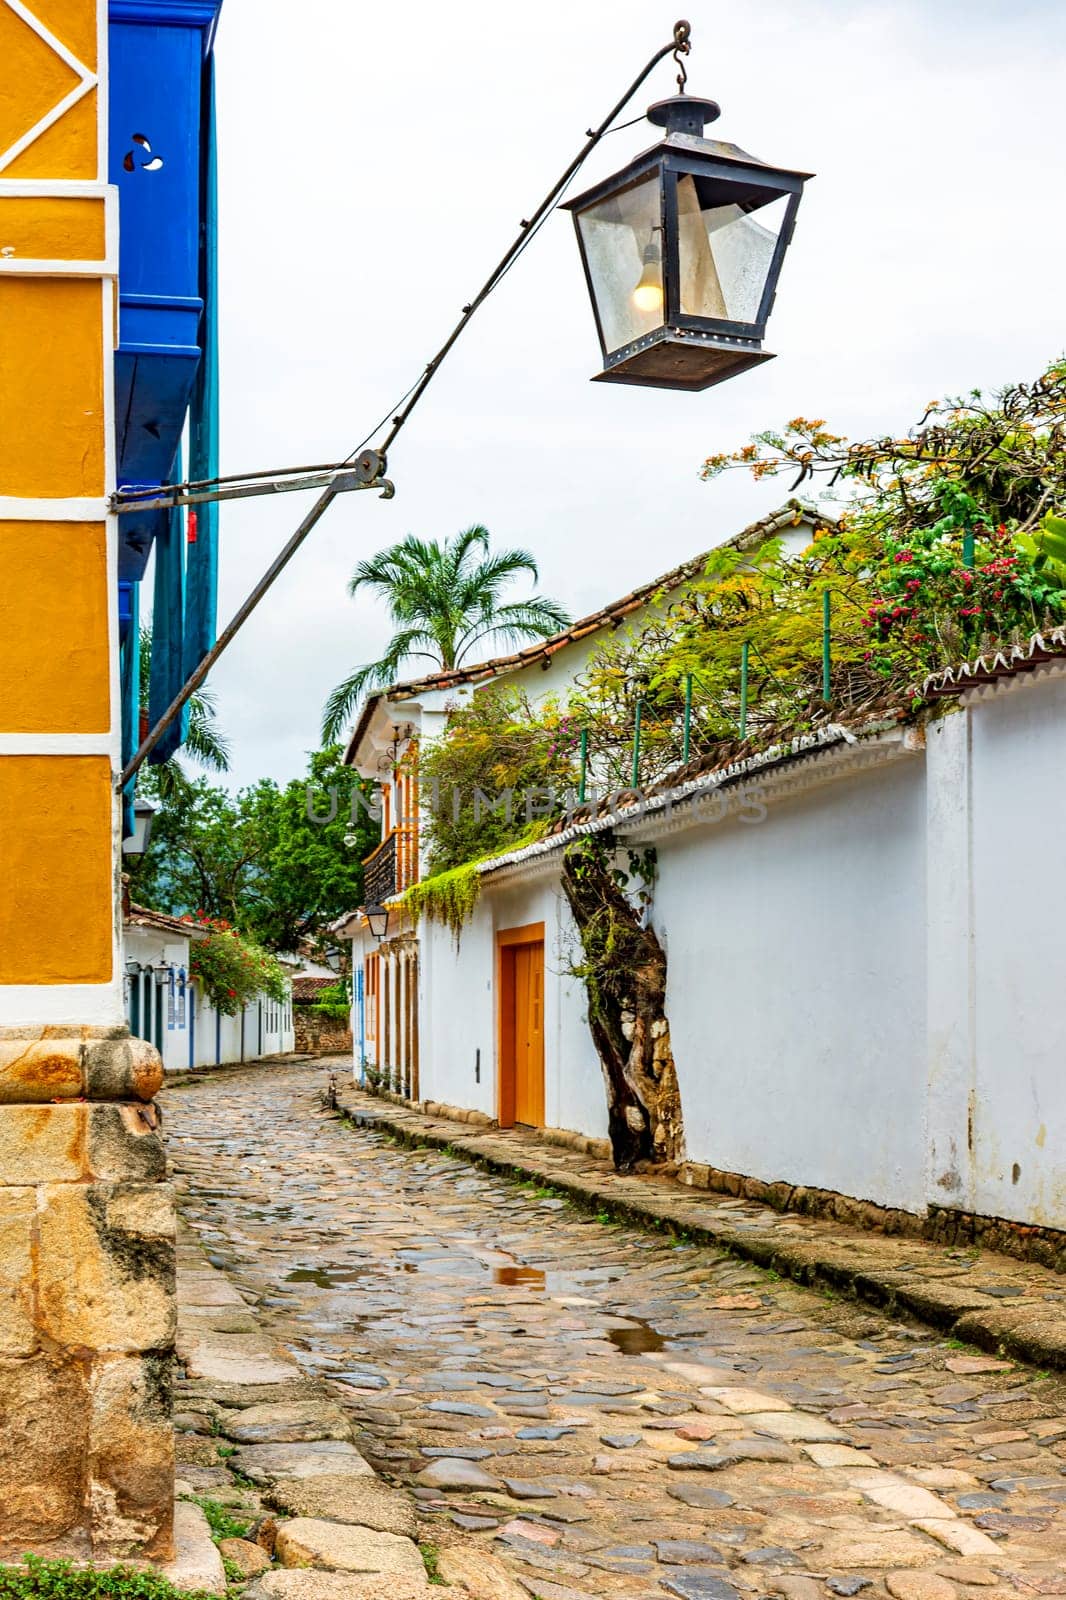 Street in the old city of Paraty by Fred_Pinheiro